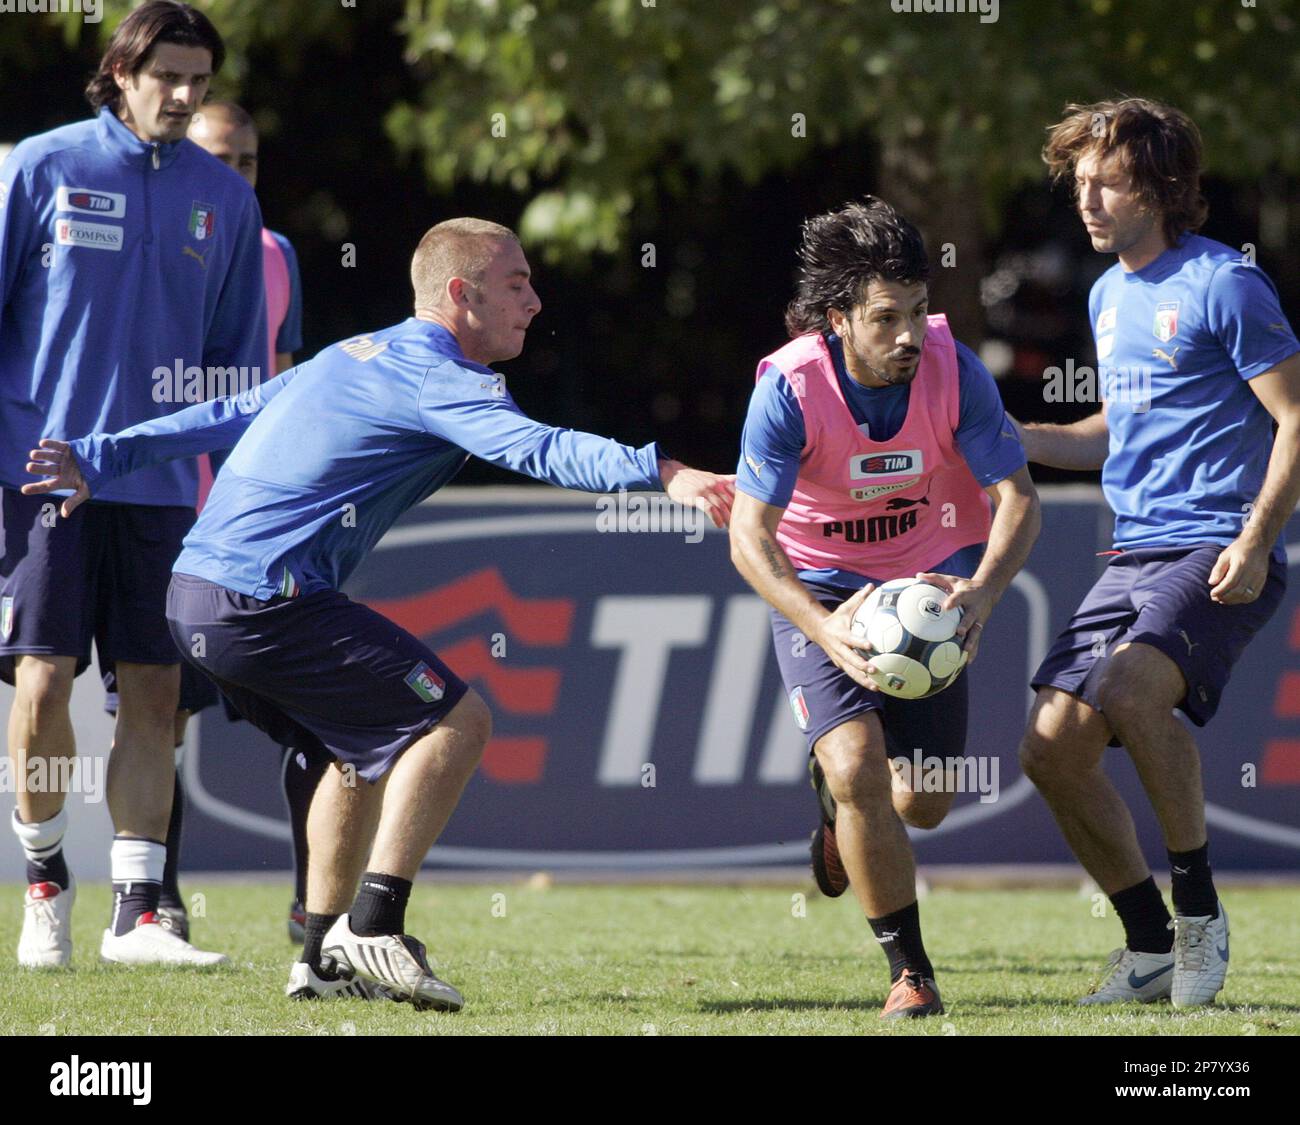 From left in background, Italy national soccer team's Vincenzo Iaquinta,  Daniele De Rossi, Gennaro Gattuso with the ball, and Andrea Pirlo, perform  a drill, during a practice session at the Coverciano training